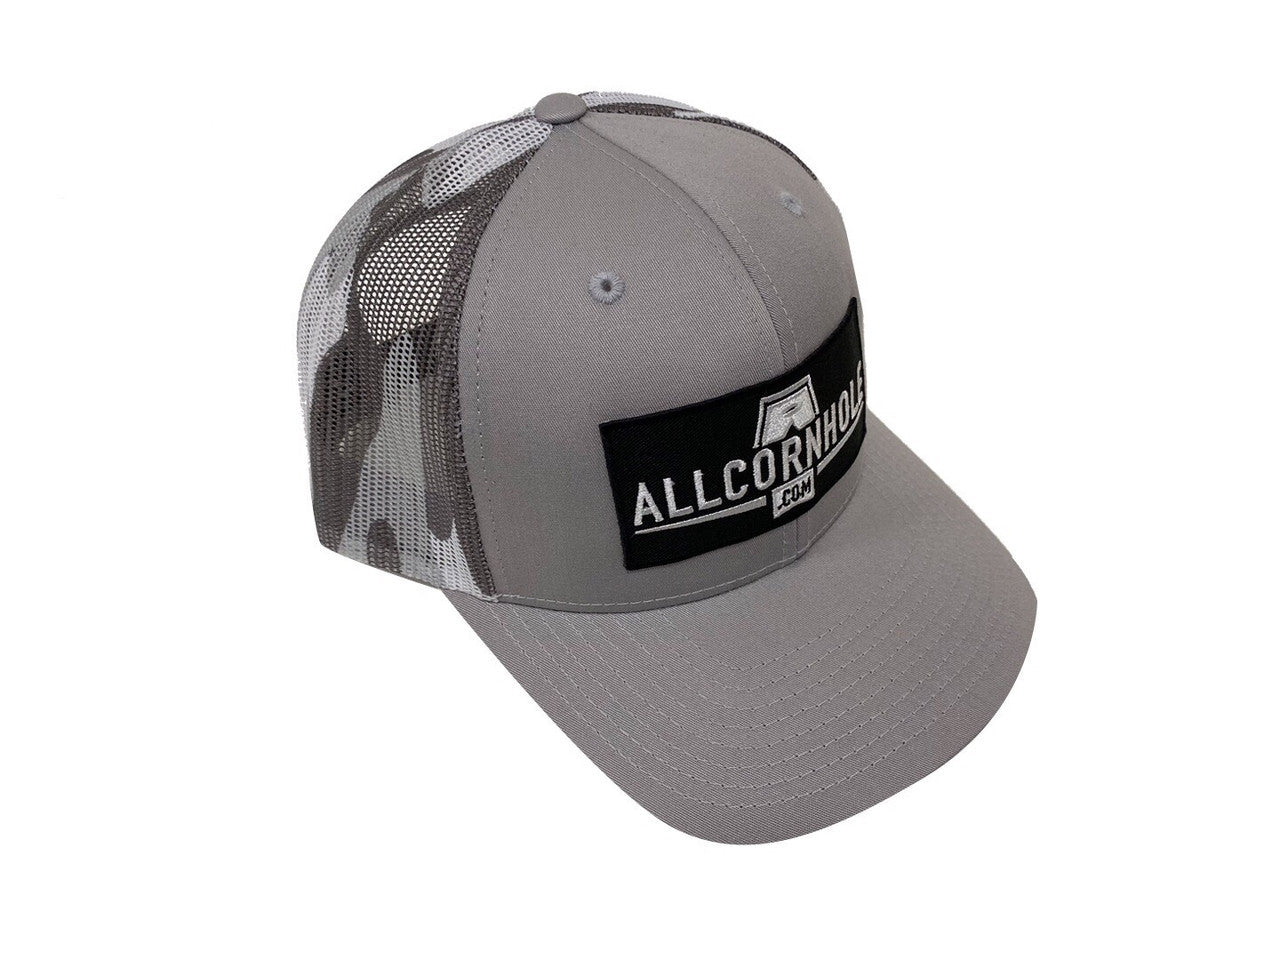 AllCornhole Curved Bill Gray Camo Snapback Hat with patch - Free Shipping